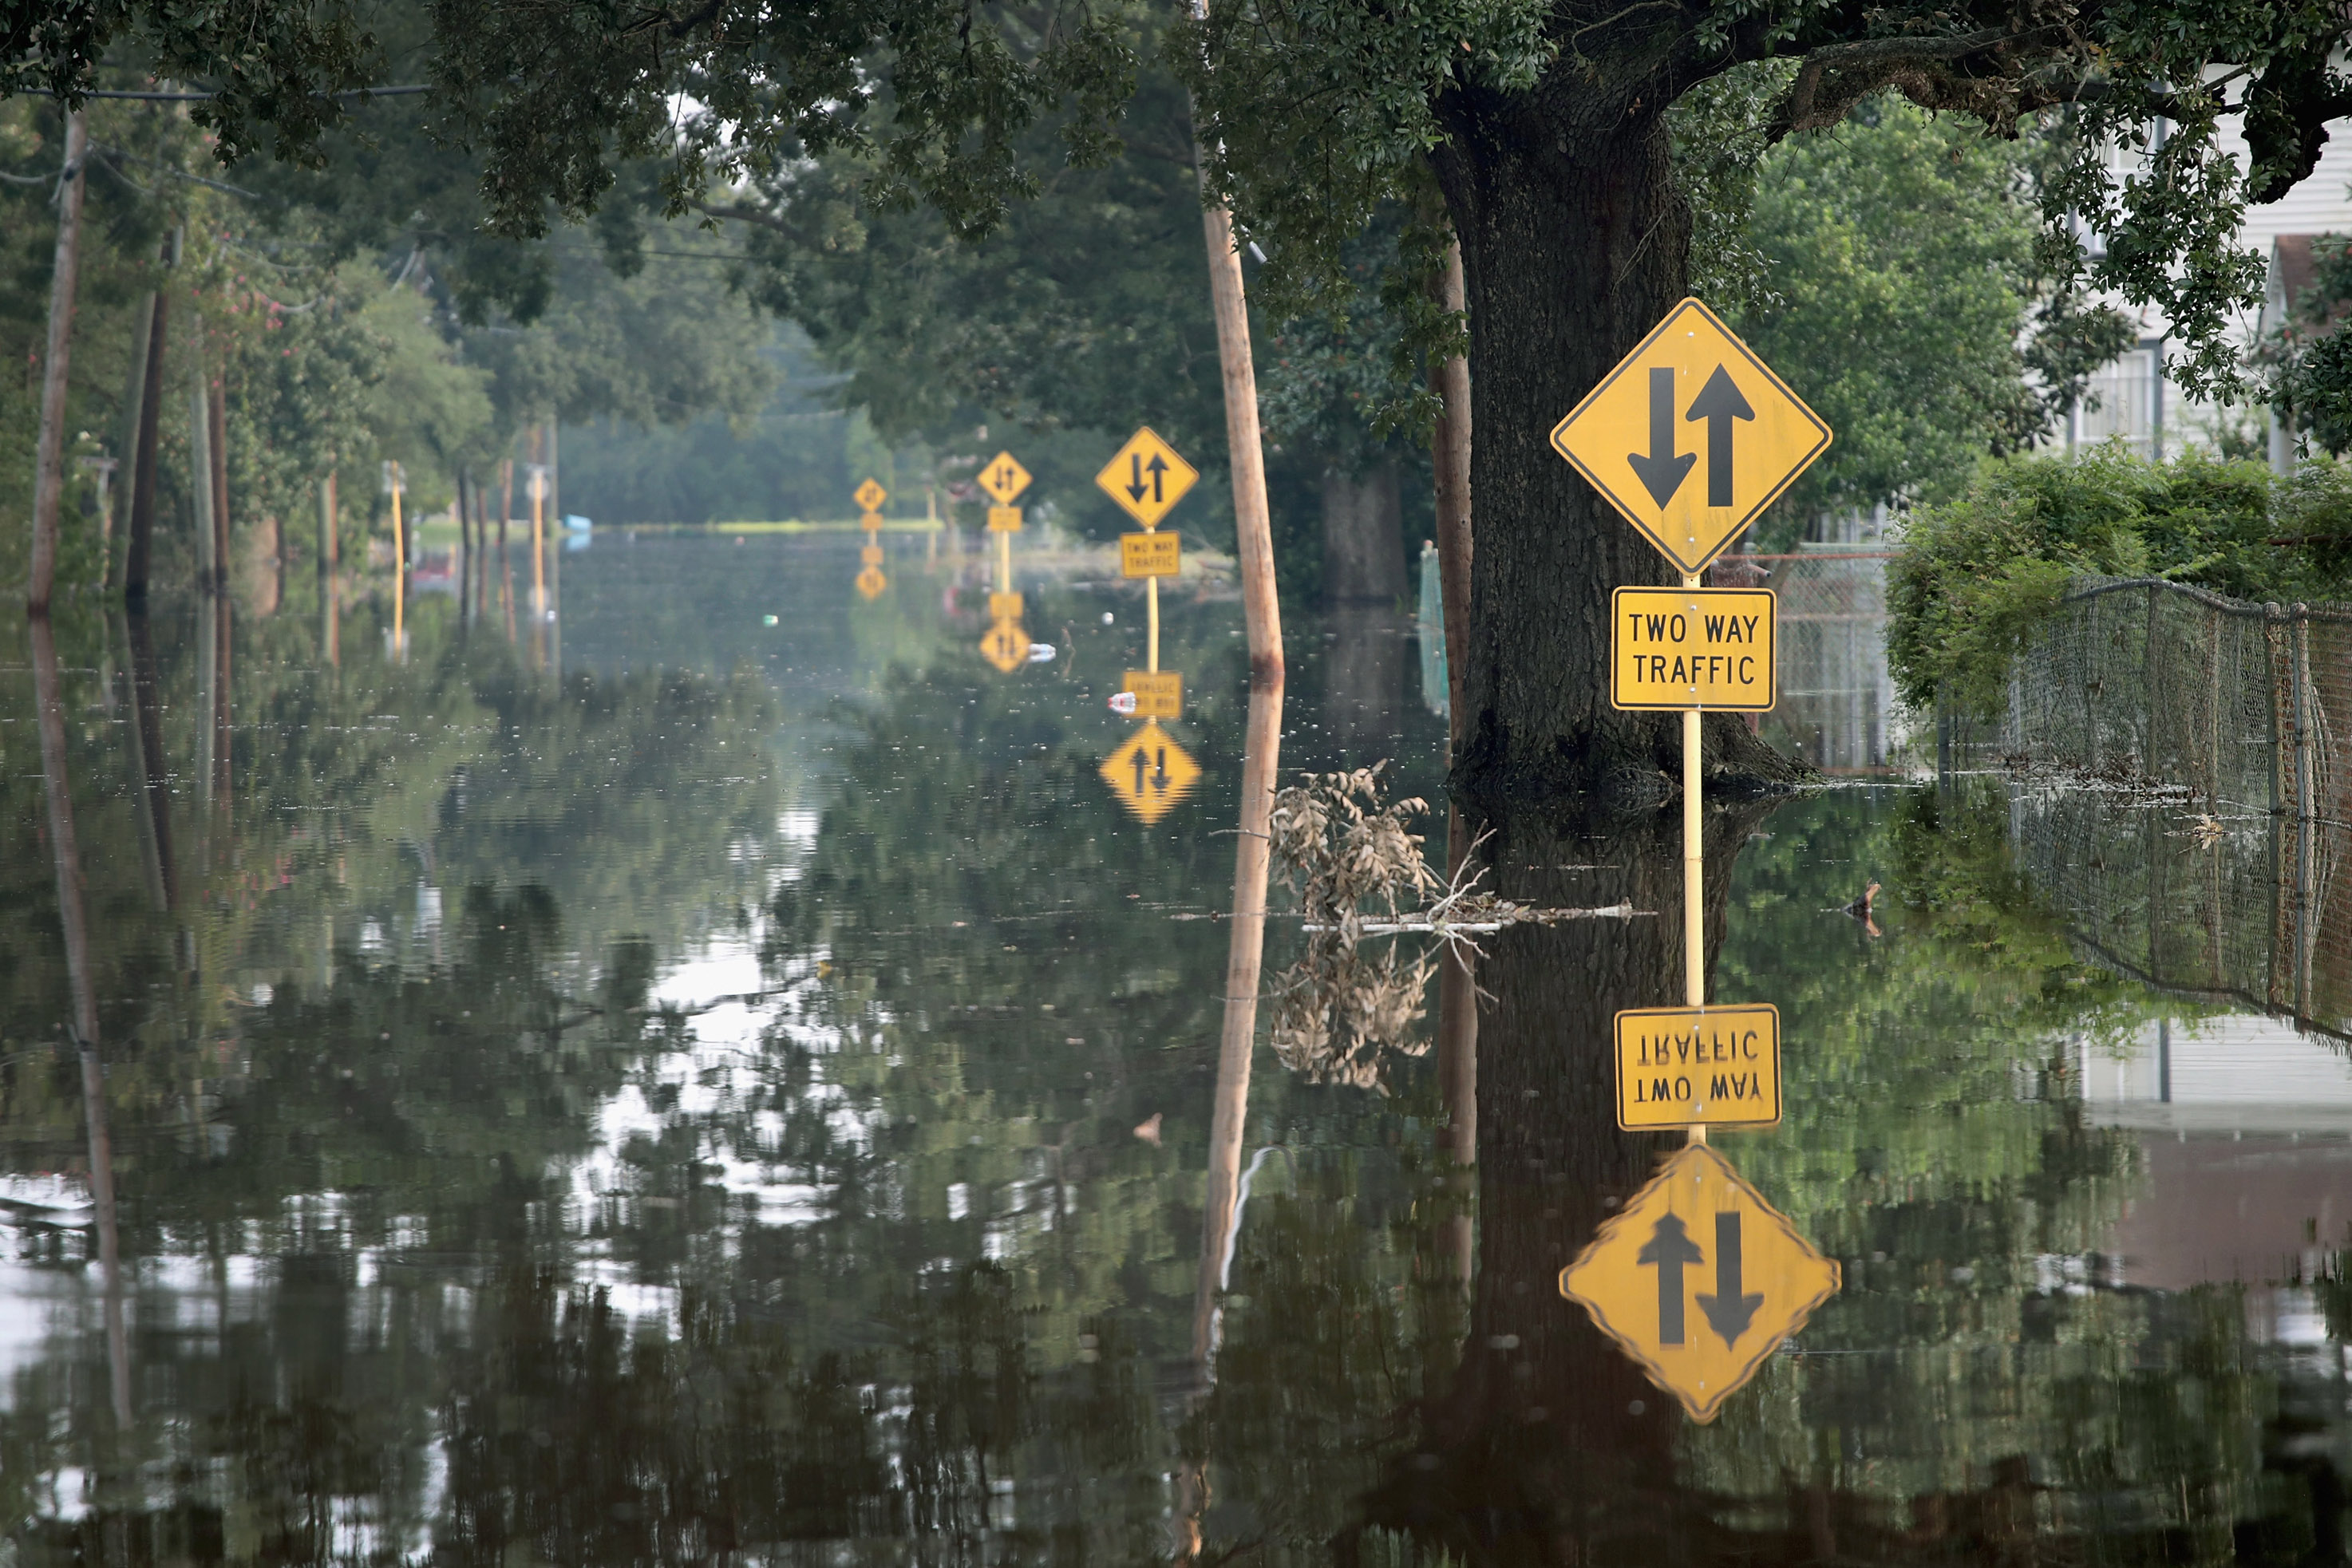 A street is covered with floodwater after torrential rains pounded Southeast Texas following Hurricane Harvey on Sept. 3, 2017 in Orange, Texas. (Scott Olson&mdash;Getty Images)